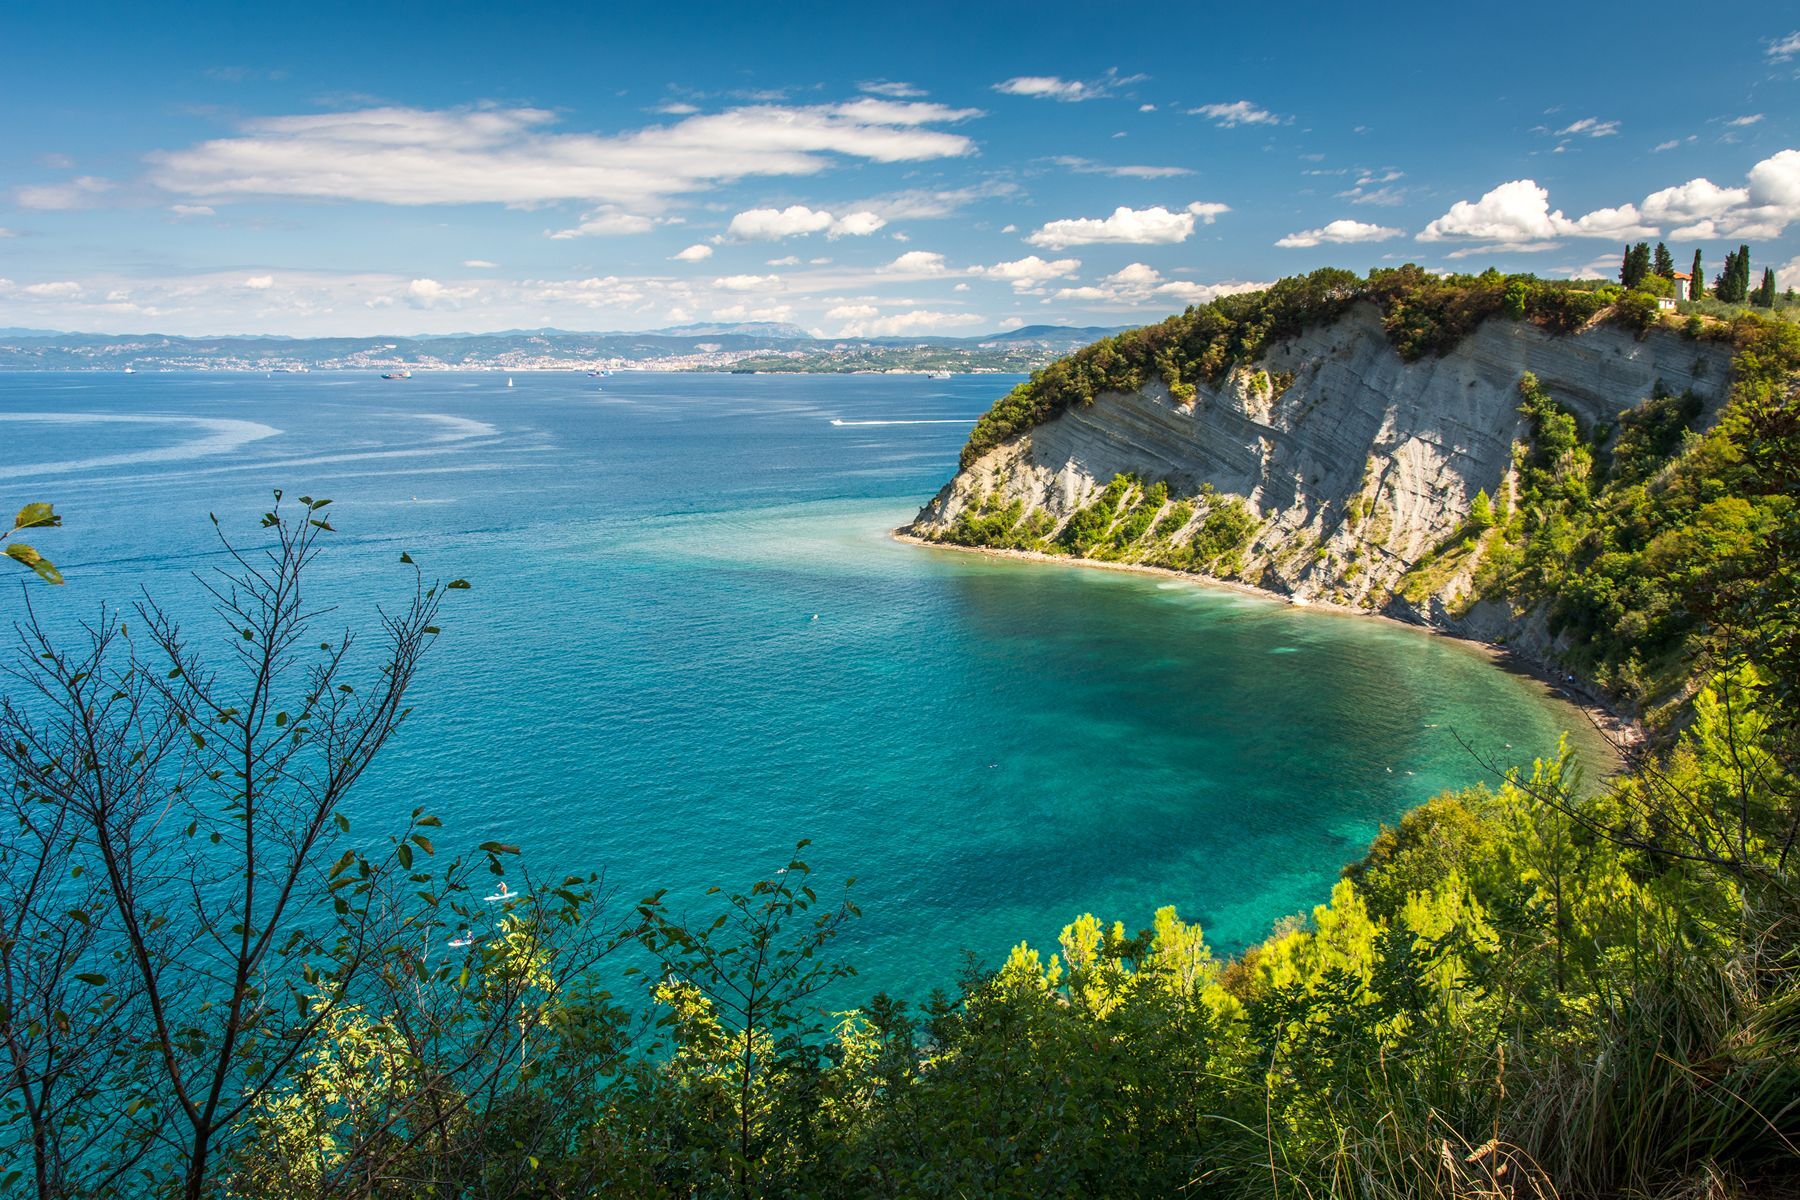 <p>For a picturesque coastal getaway in southwest Slovenia, you’ll want to add the <a href="https://www.naravniparkislovenije.si/en/nature-parks/strunjan-landscape-park">Strunjan Landscape Park</a> to your itinerary. The nature reserve boasts sheer cliffs that plunge into the Adriatic Sea and hiking trails full of interesting flora and fauna that are sure to delight nature enthusiasts. If you’d rather spend a day relaxing in the sun, head to the reserve’s sublime <a href="https://www.portoroz.si/en/experience/activities/beaches/4464-object-moon-bay-or-the-bay-of-the-cross">Moon Bay beach</a> for a refreshing swim in an unspoilt environment.</p>